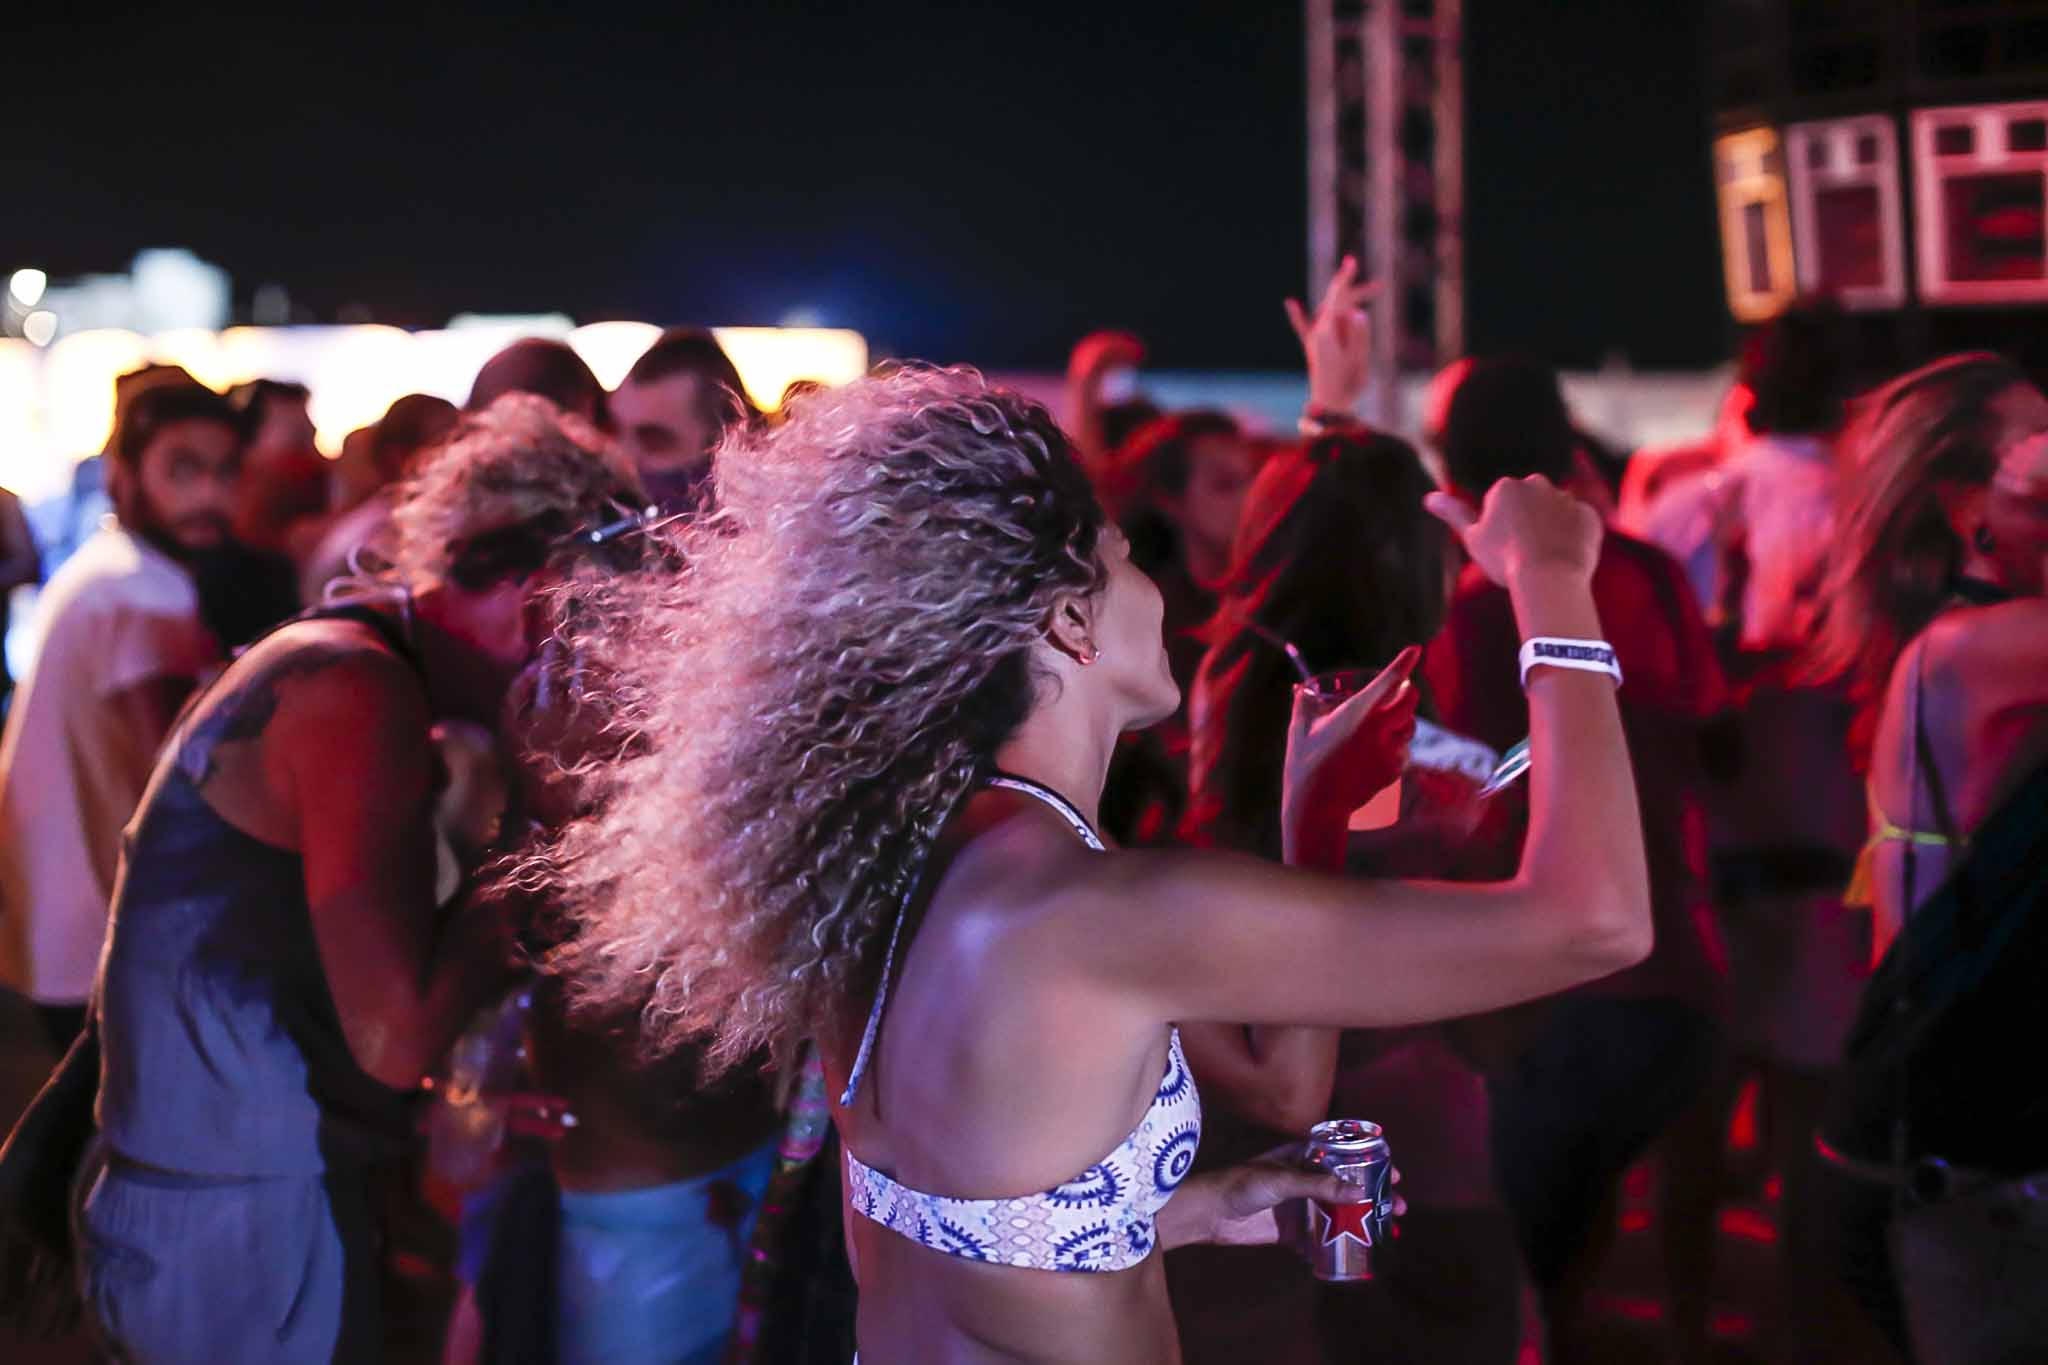 Nacelle Just Released the Aftermovie for Heineken's Sandbox 2016 and It's Beautiful